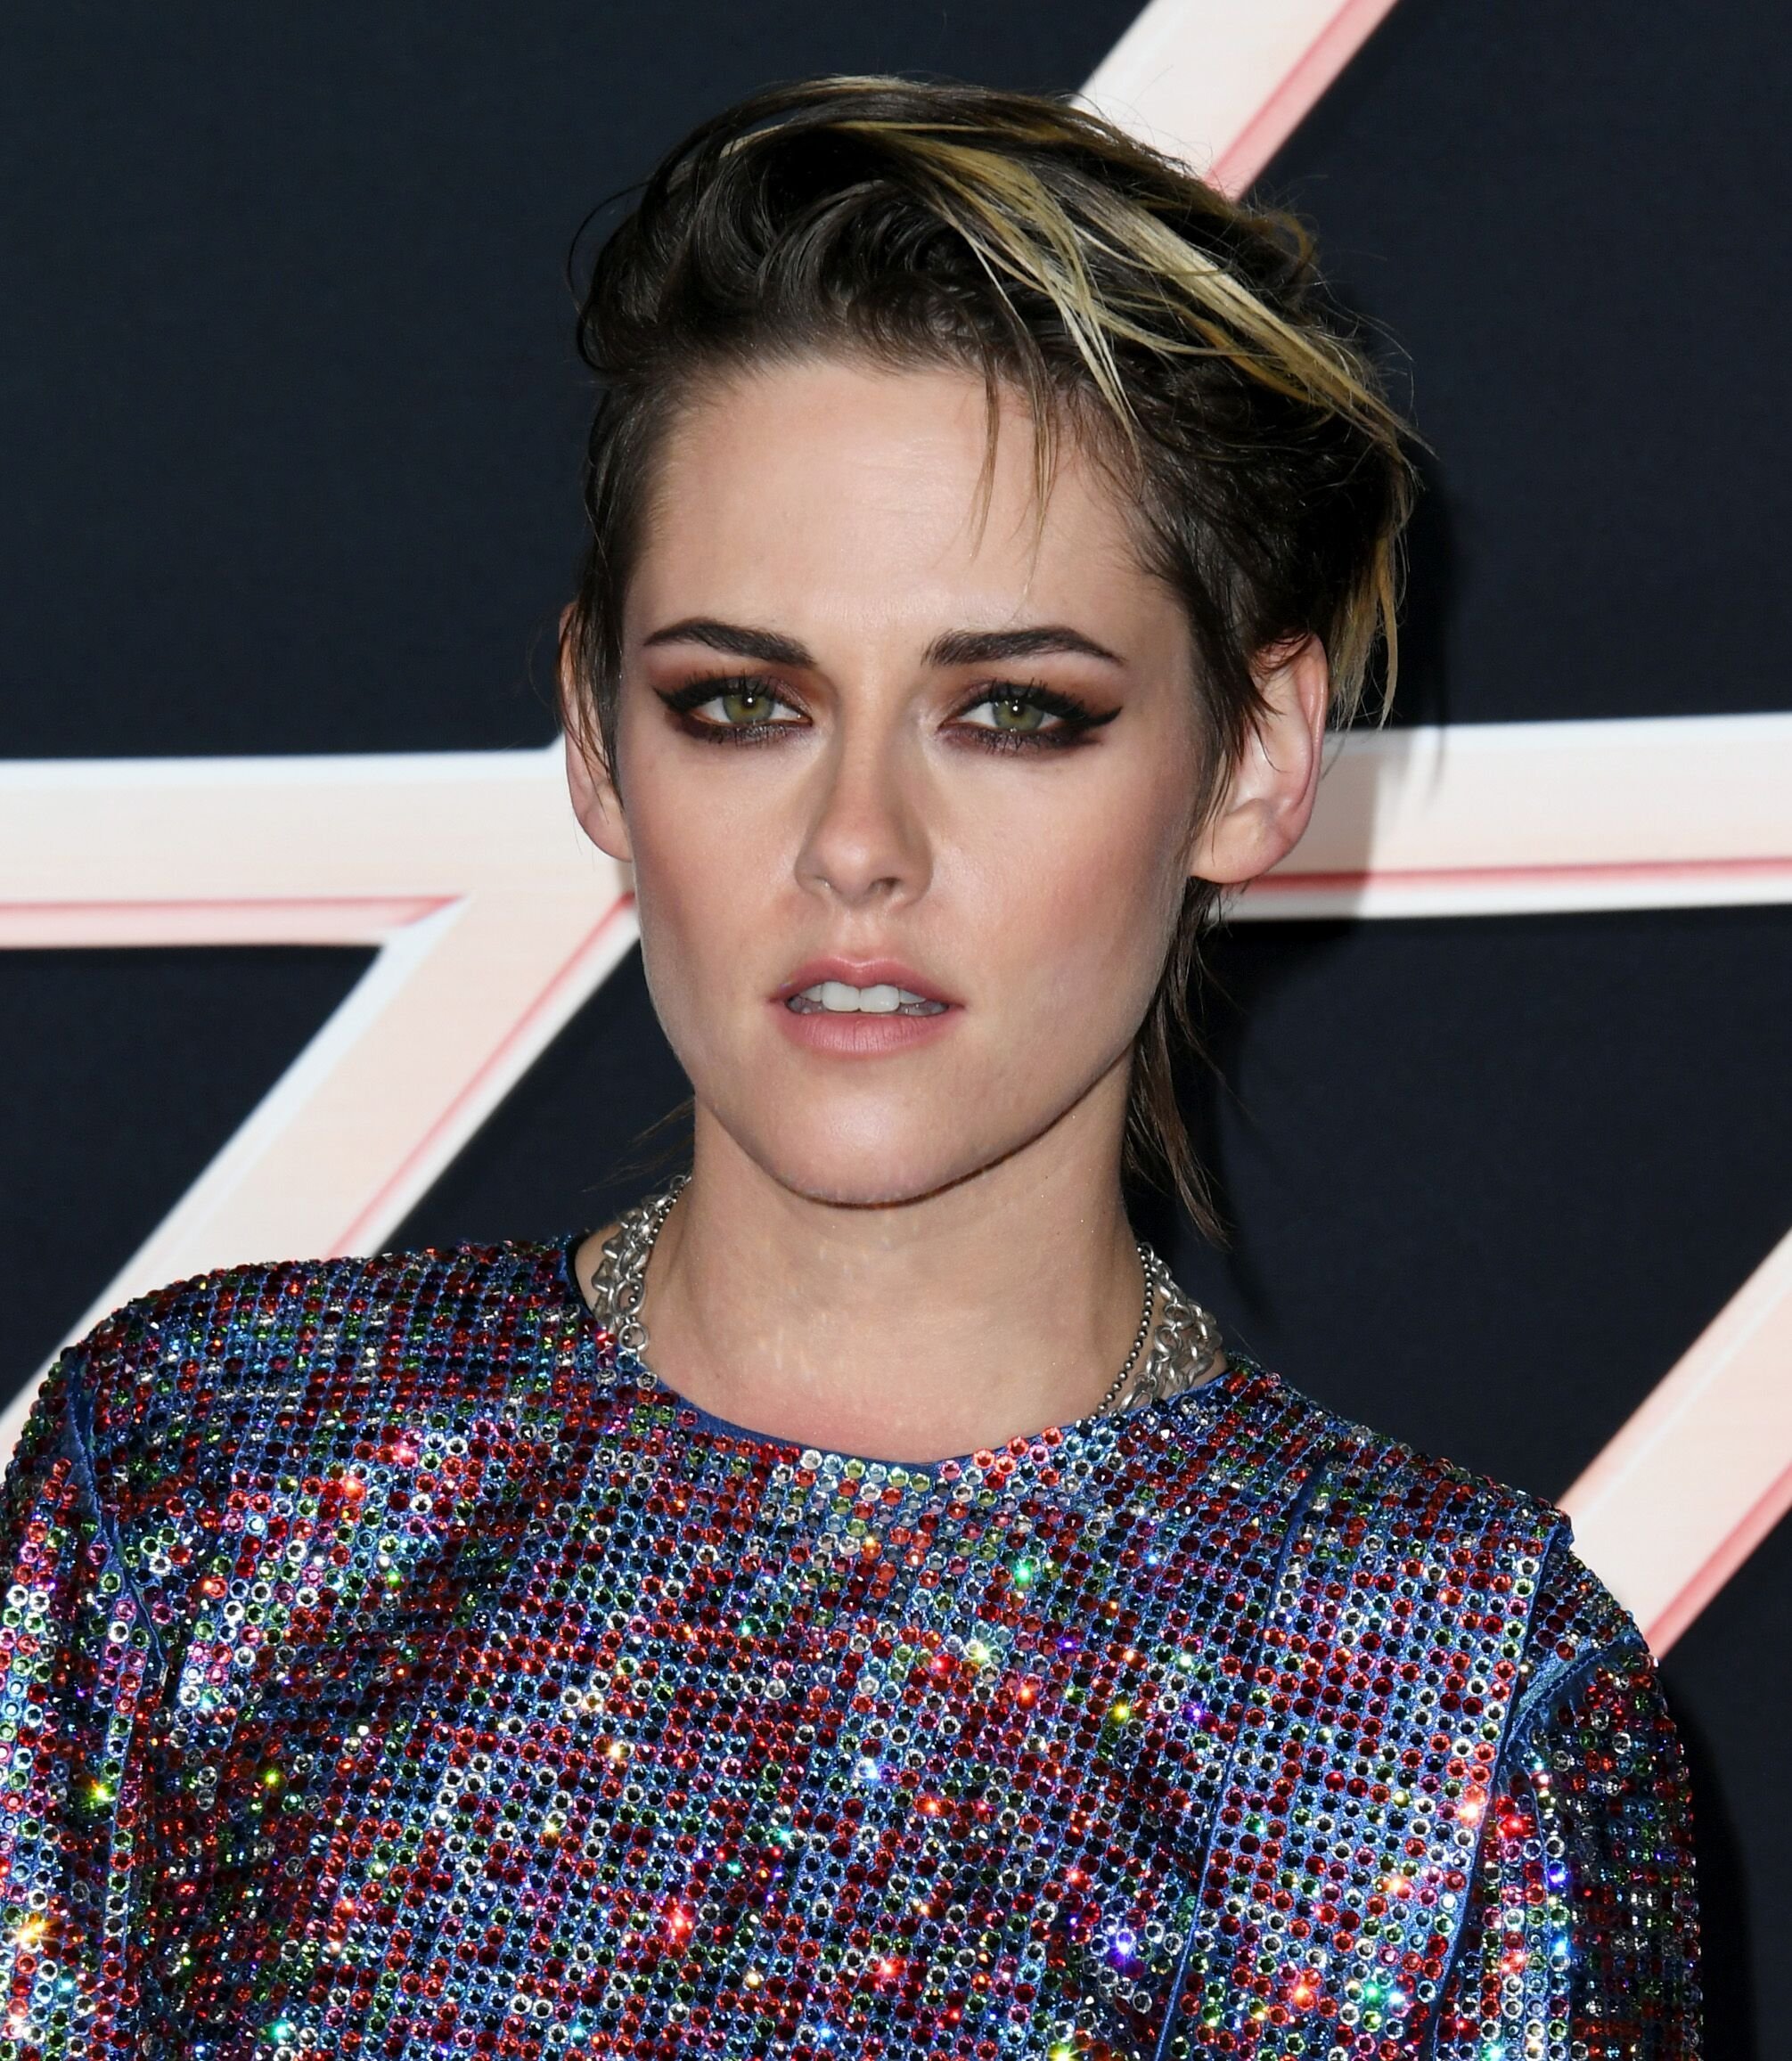 Kristen Stewart attends the premiere of Columbia Pictures' "Charlie's Angels." | Source: Getty Images